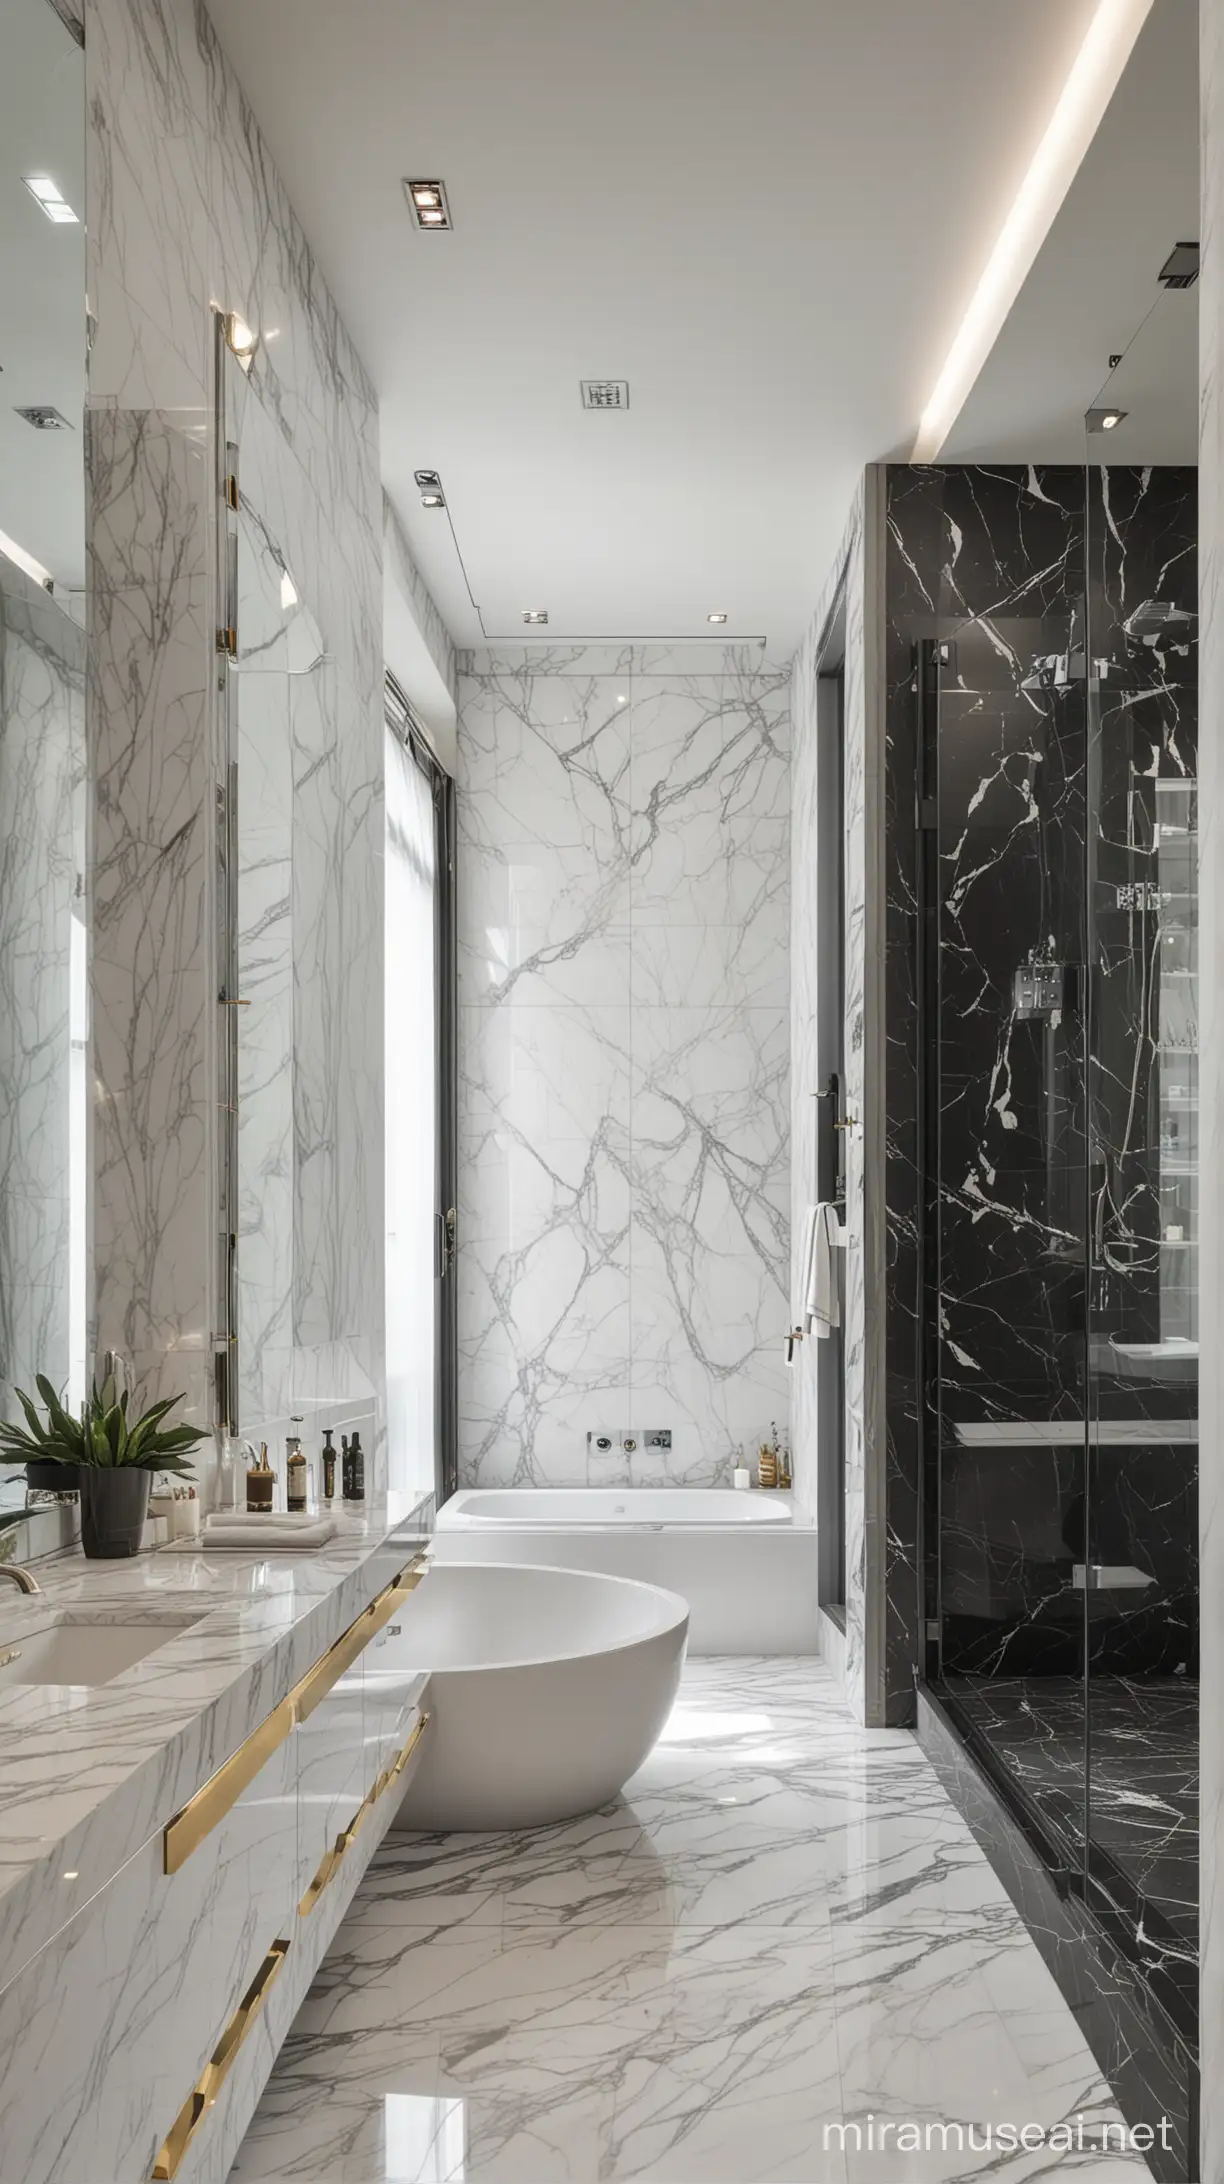 master bathroom,modern design,2 lavatory at the left side,bathtub at the front,wc with glass door,white marble at the floor,modern ceiling,calacatta marble walls,1 black marbke wall